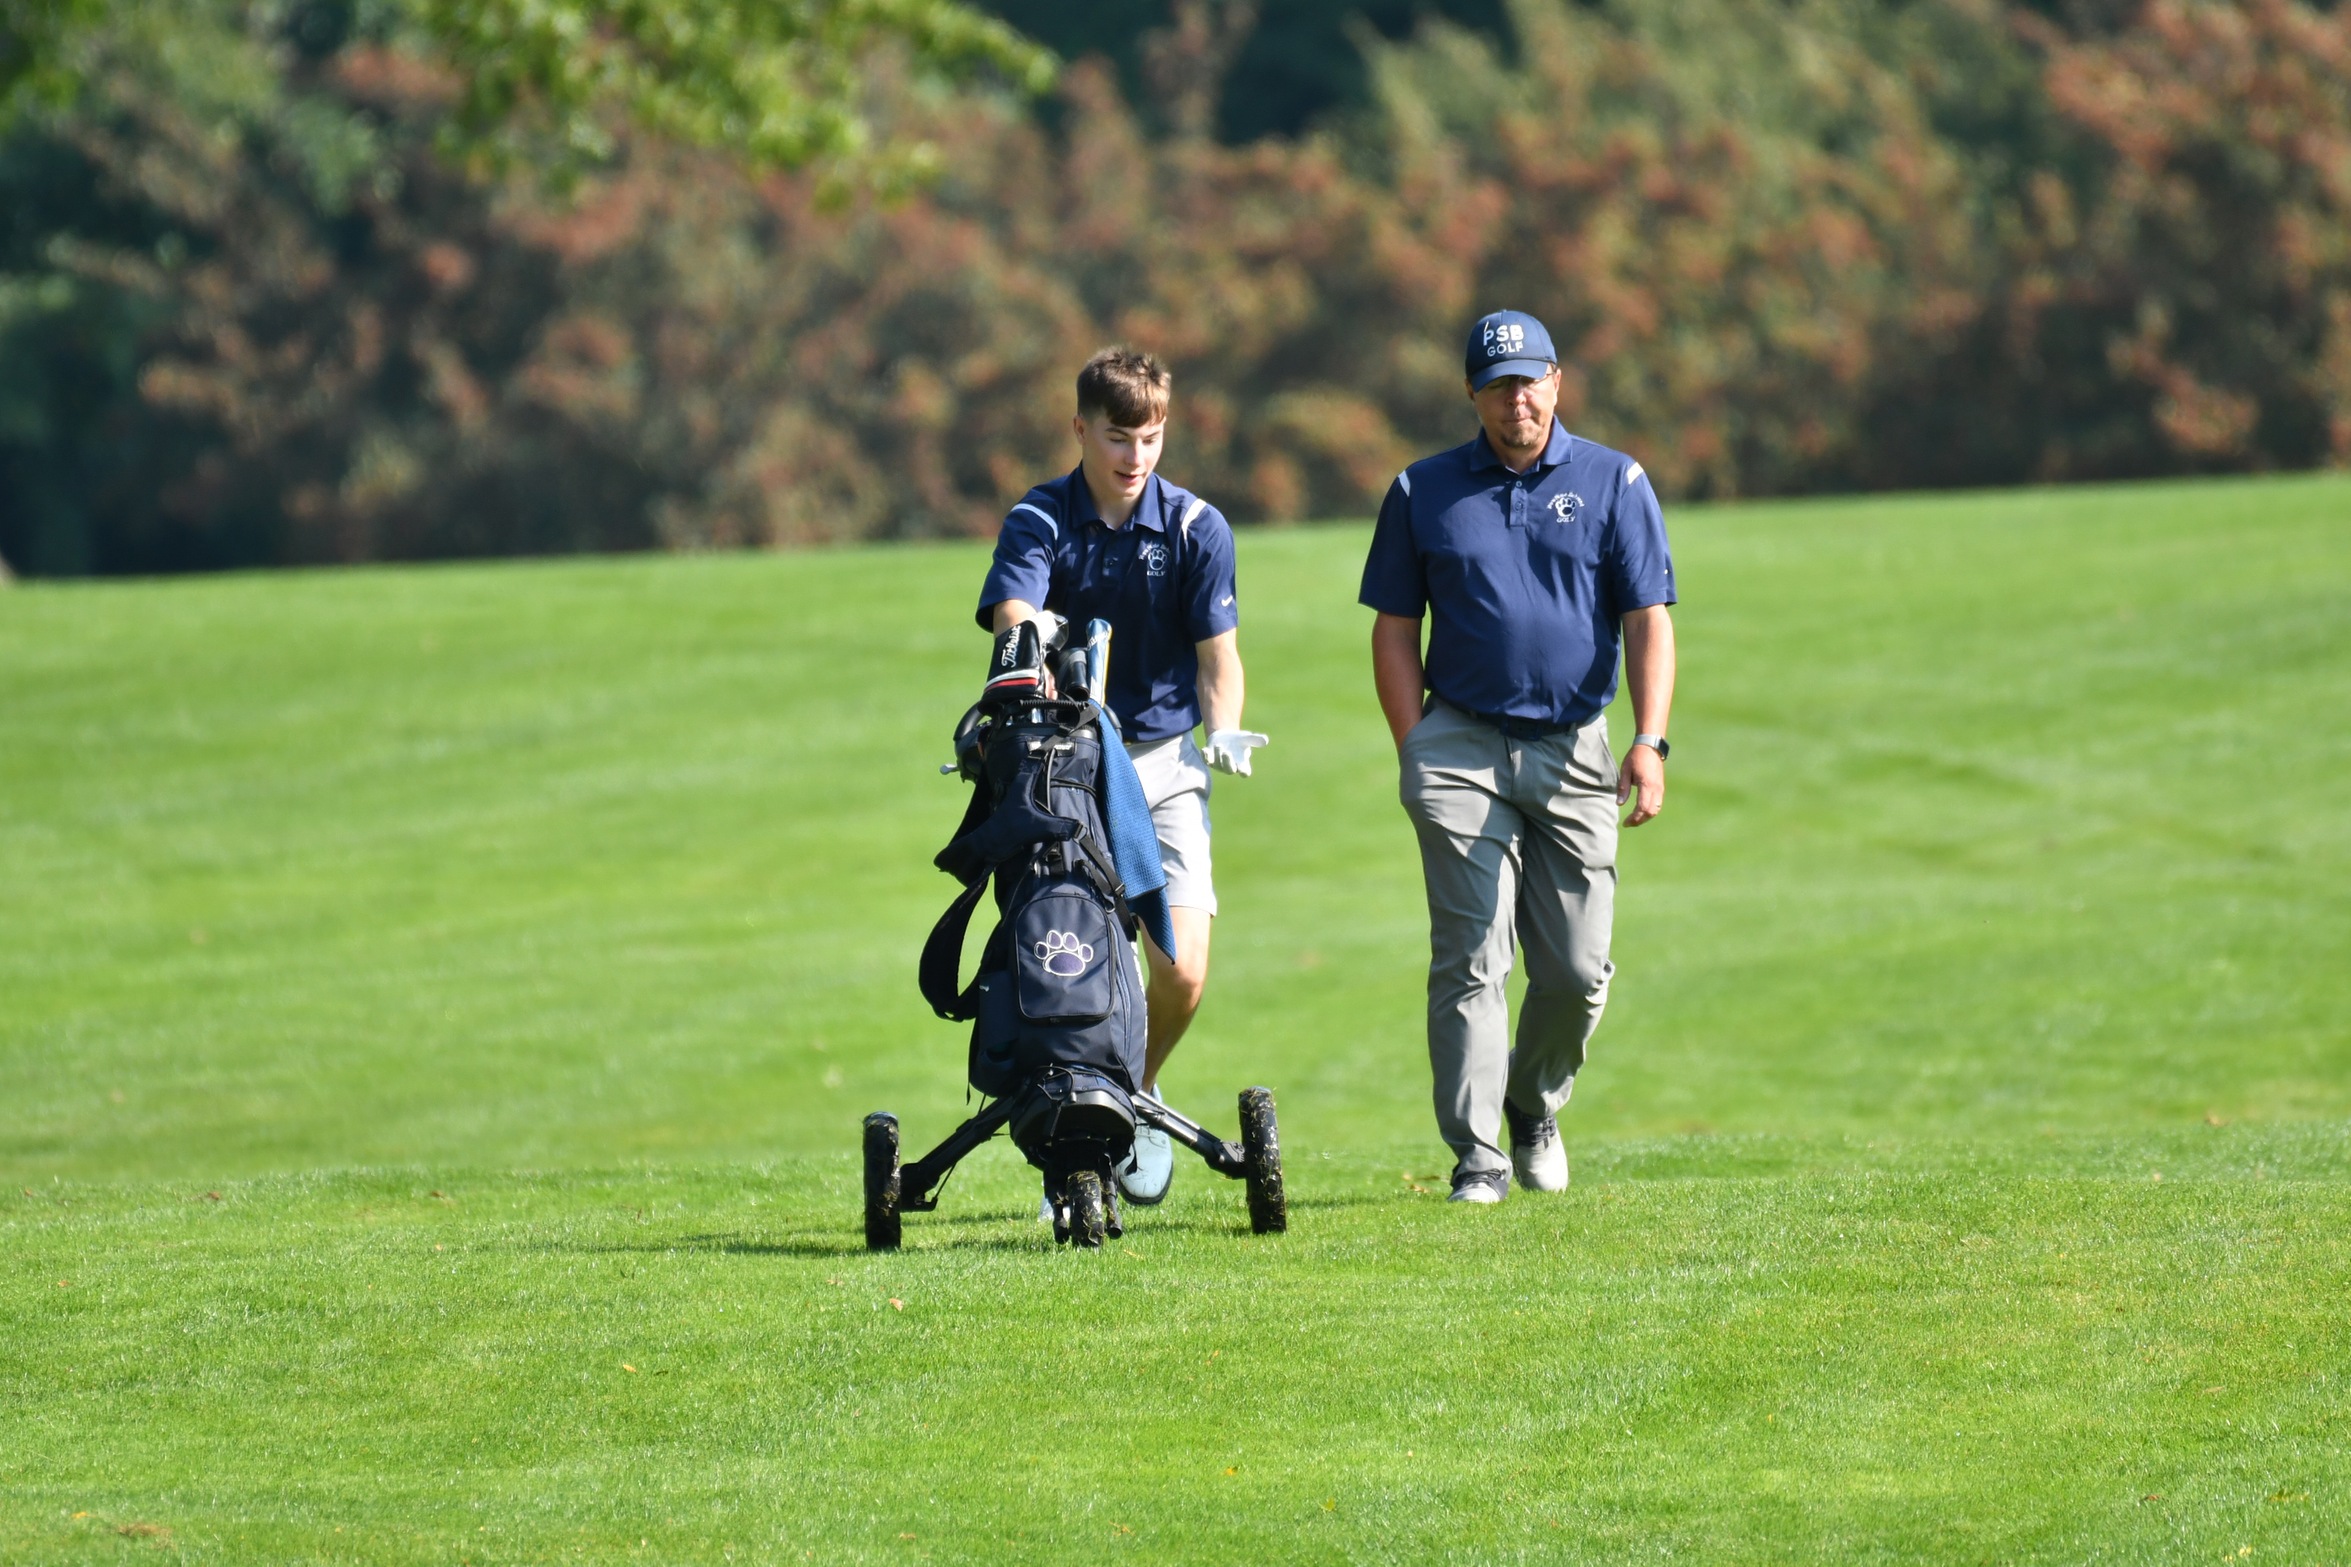 Men's Golf Places 11th at Region V Preview